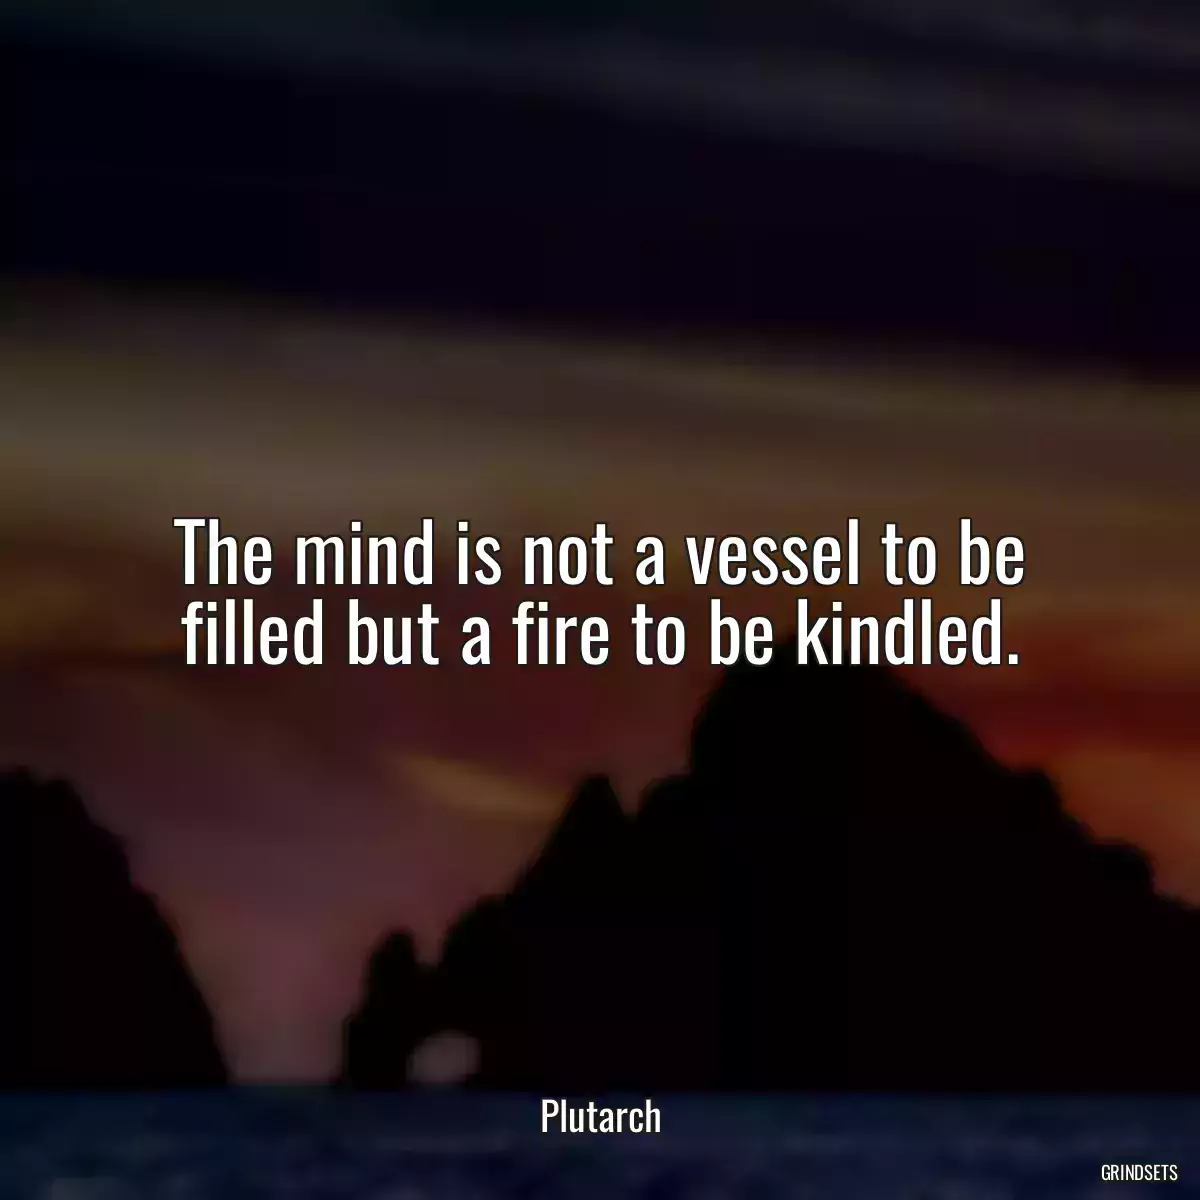 The mind is not a vessel to be filled but a fire to be kindled.